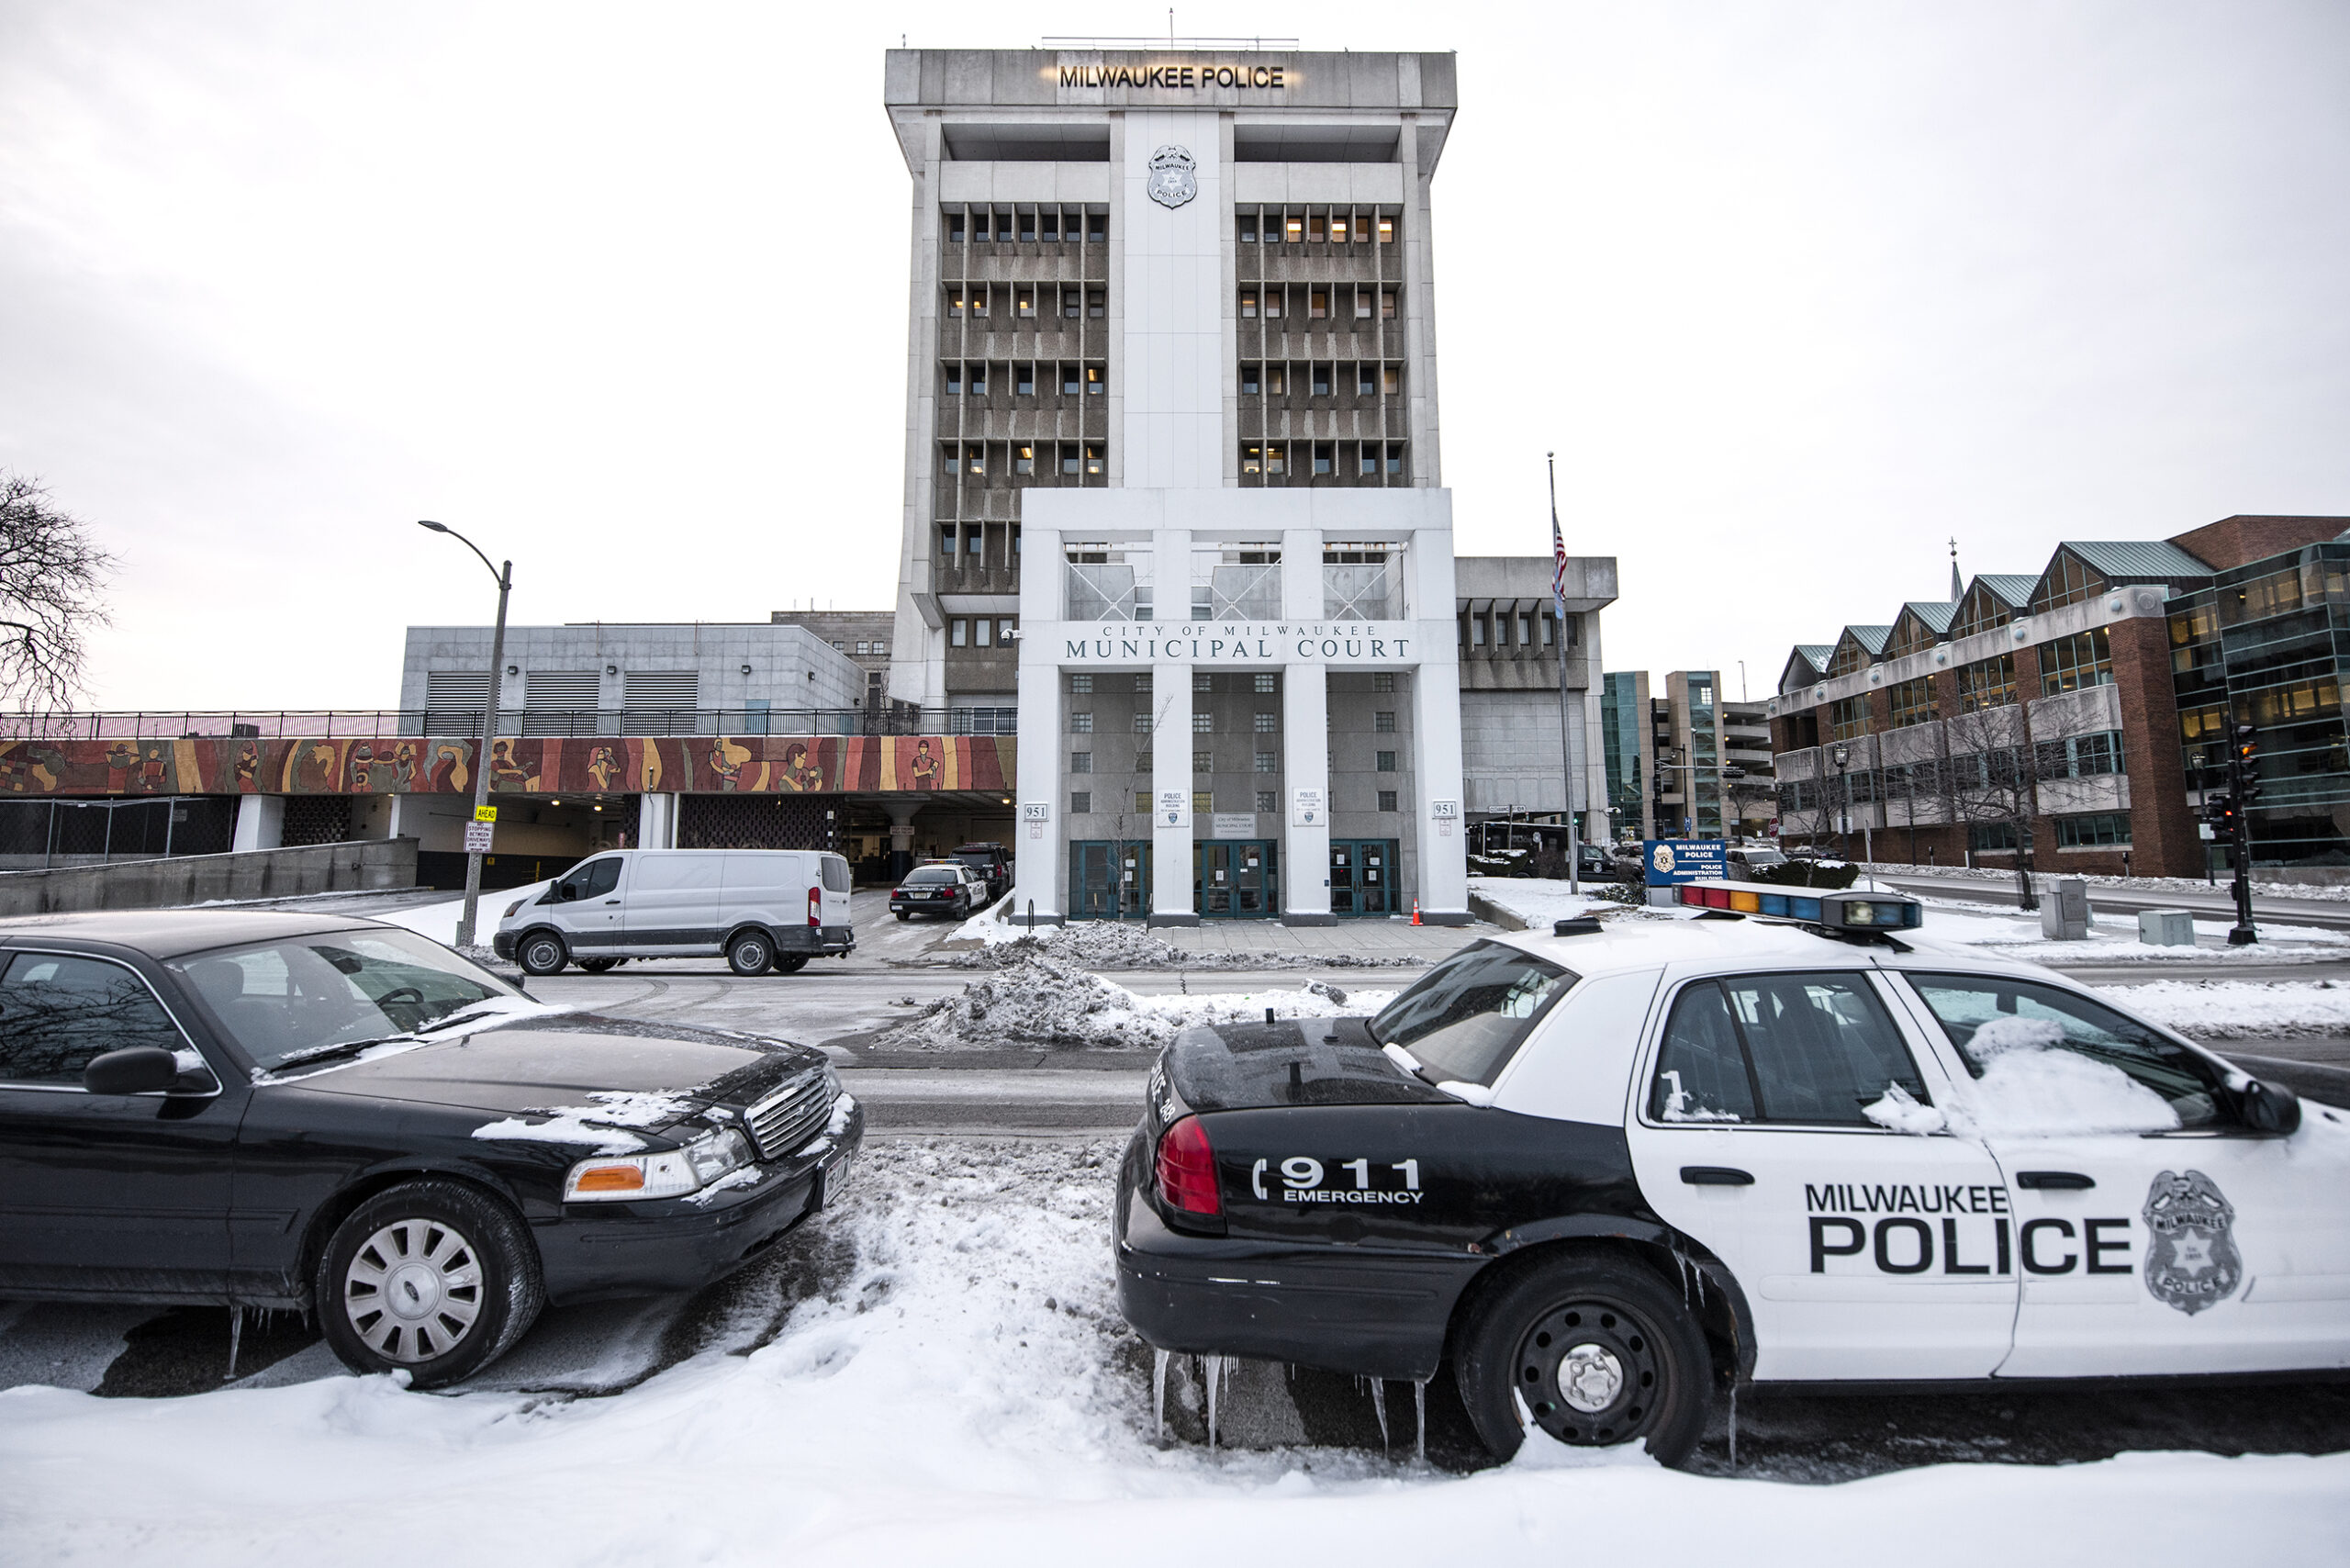 Two Milwaukee police vehicles are parked on a snowy street. The Milwaukee police department is in the background.